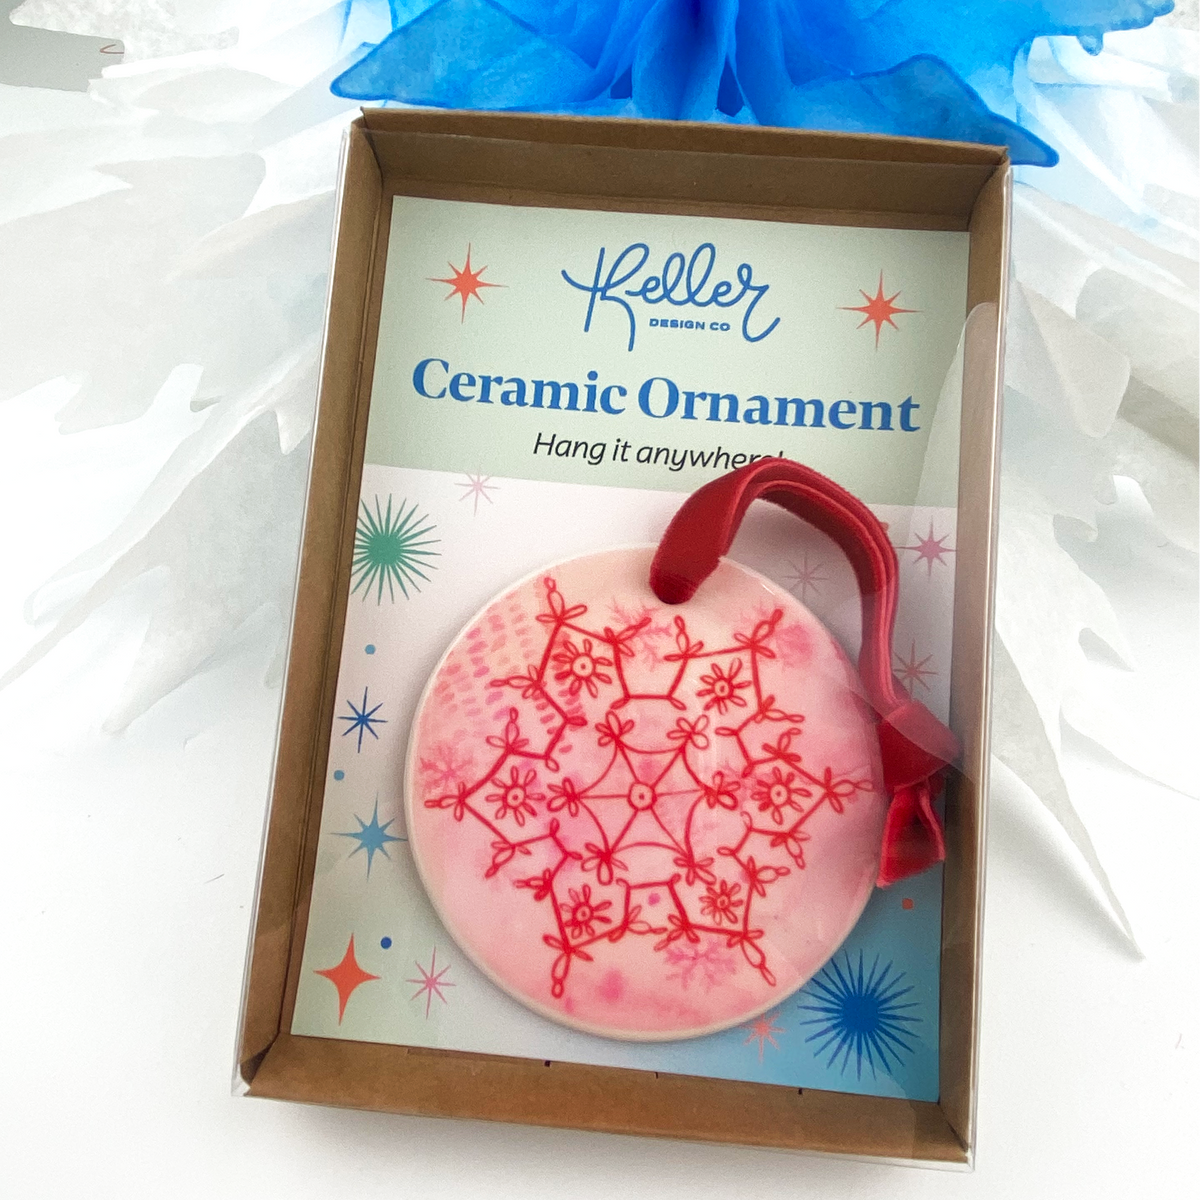 Ceramic Ornament with Red Snowflake Print